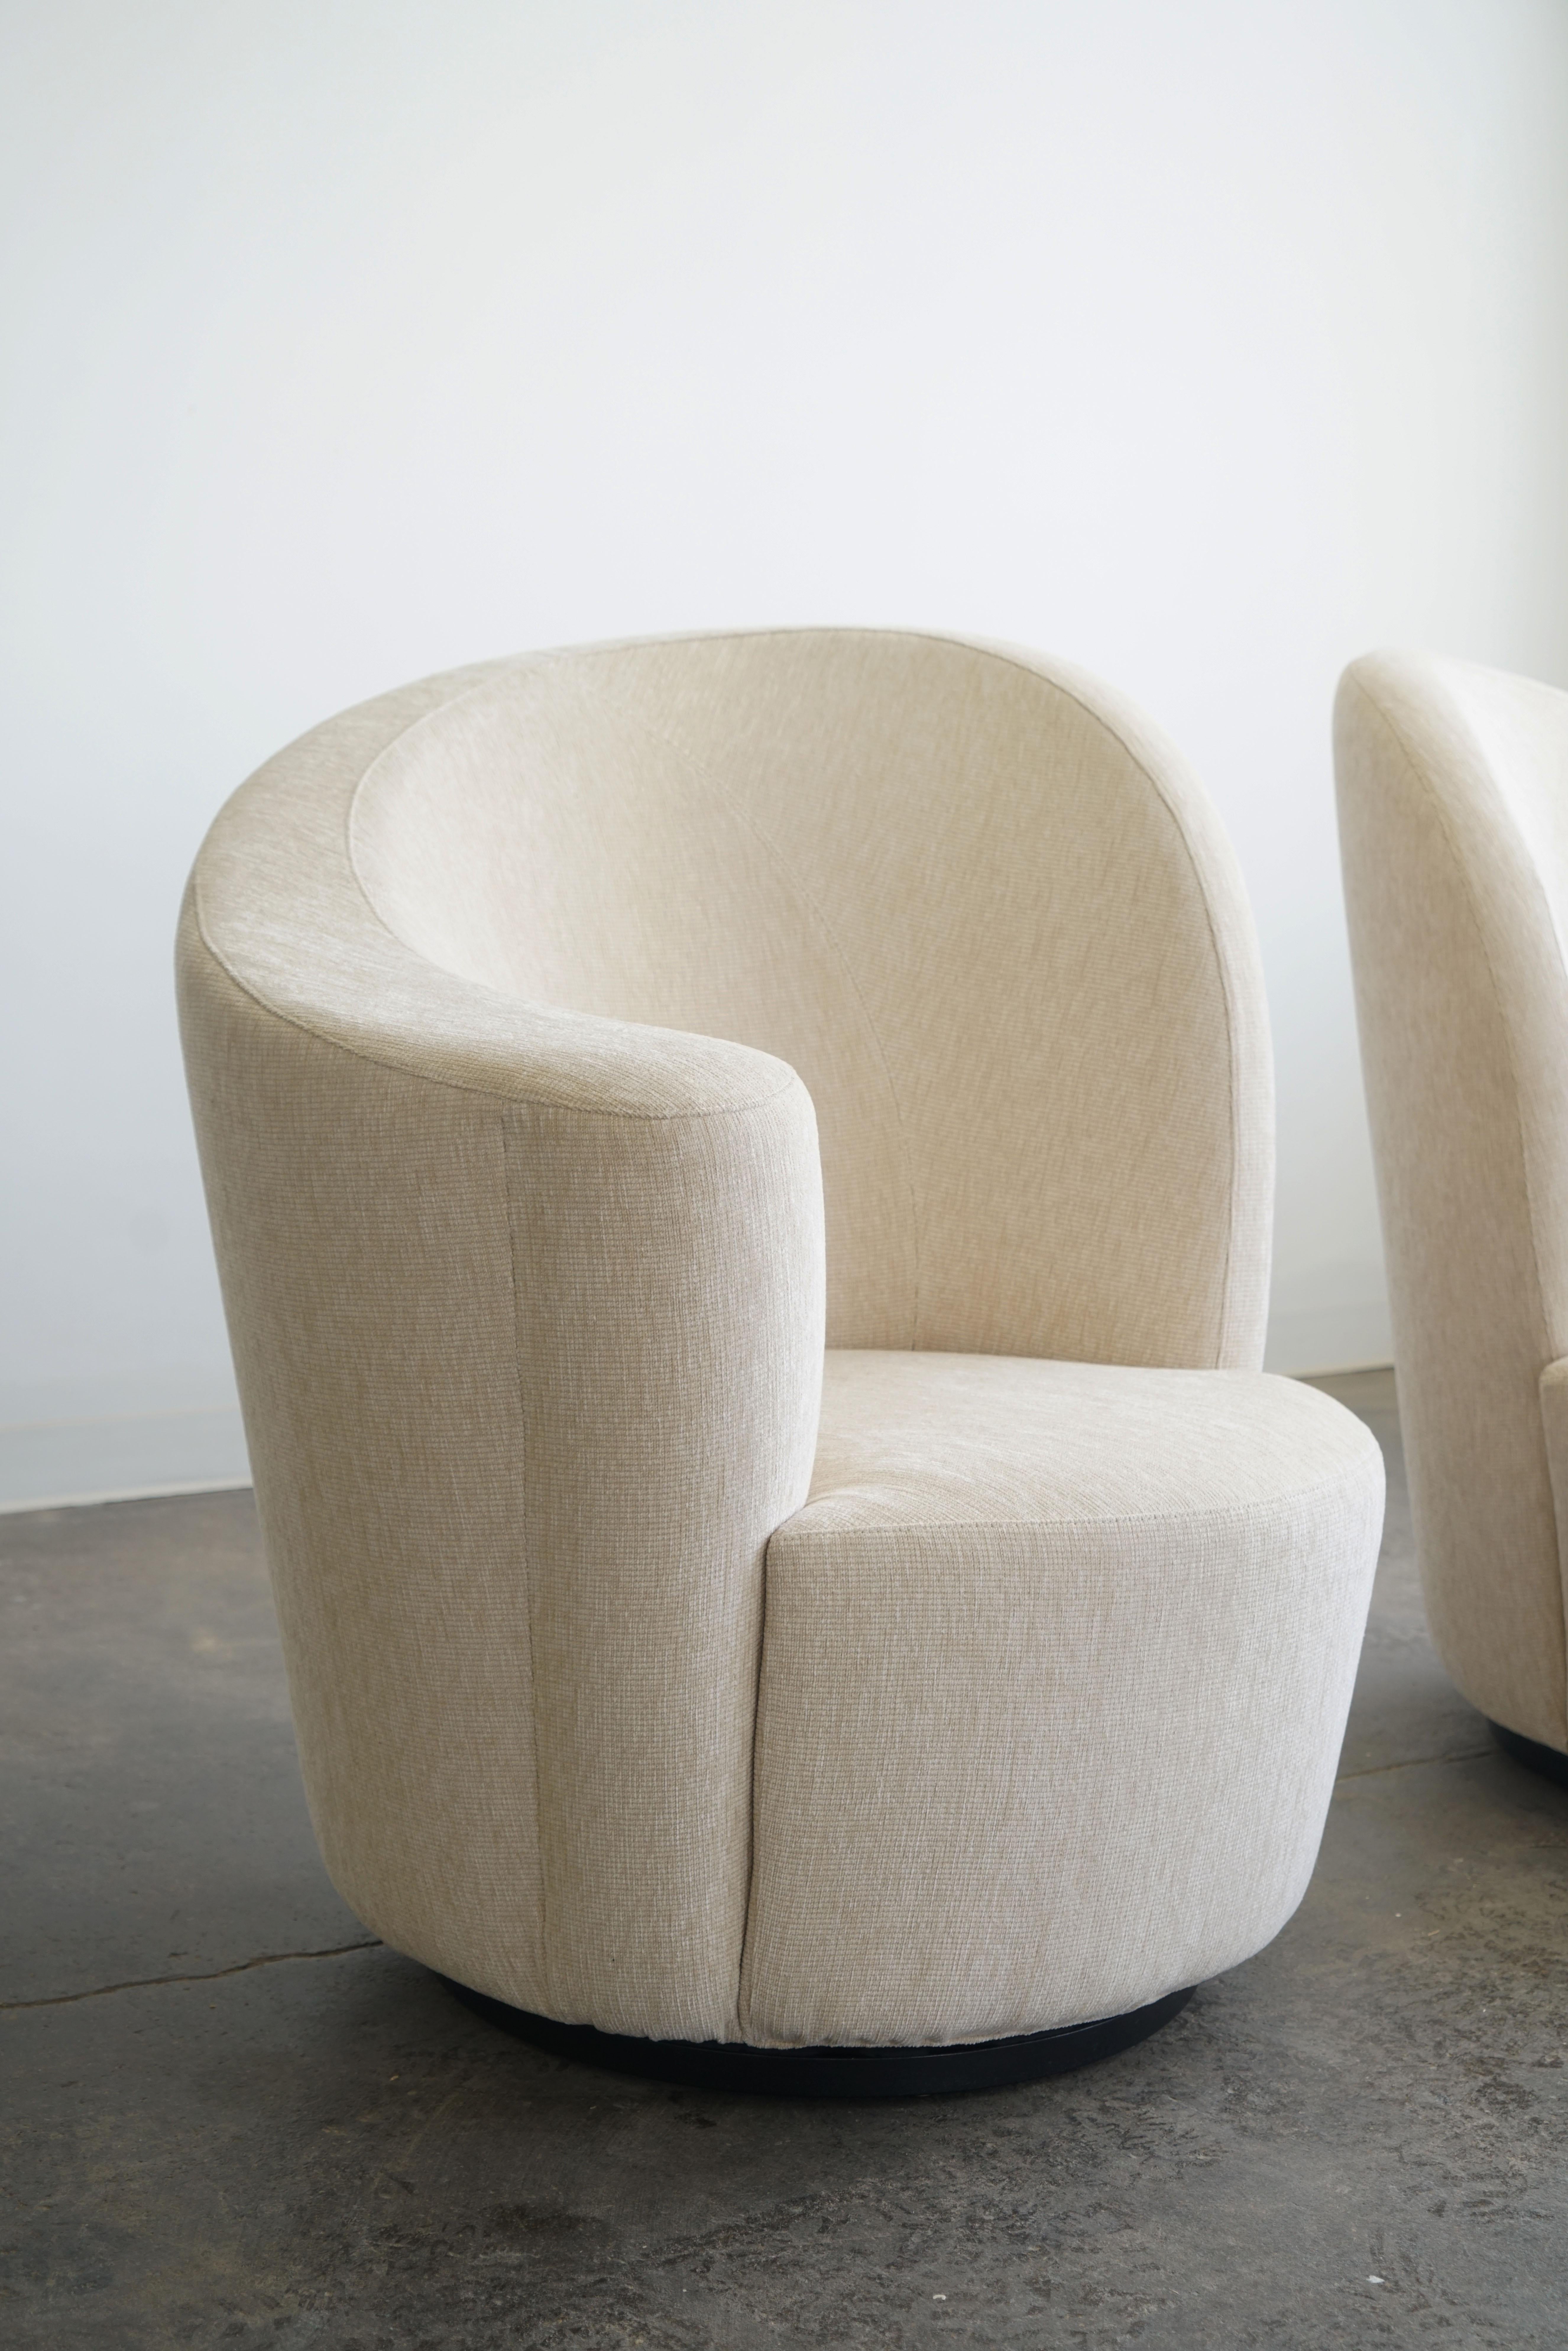 Pair of Vladimir Kagan Nautilus style Swivel Armchairs corkscrew modern In Excellent Condition For Sale In Chicago, IL